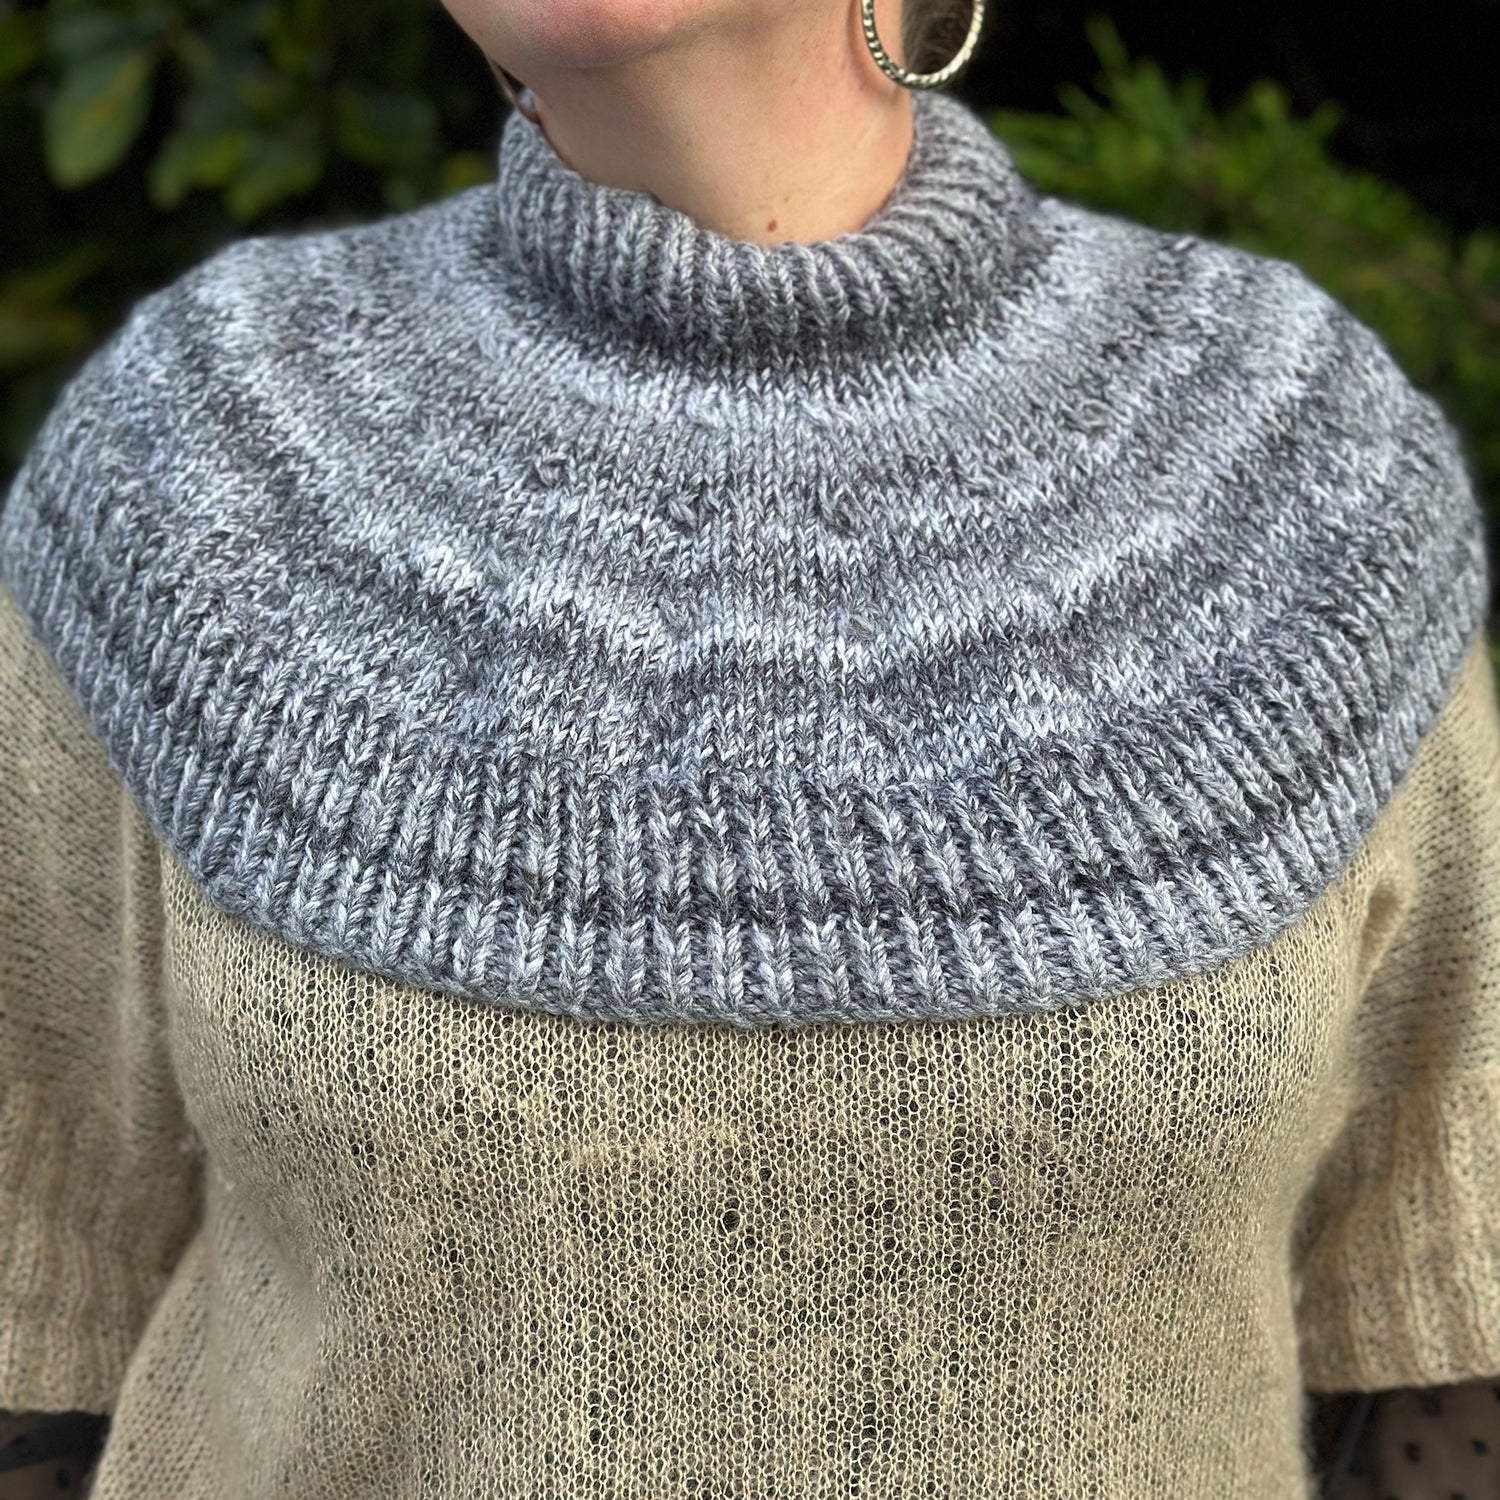 Staff Project: Neck Warmer in James C Brett Marble Chunky